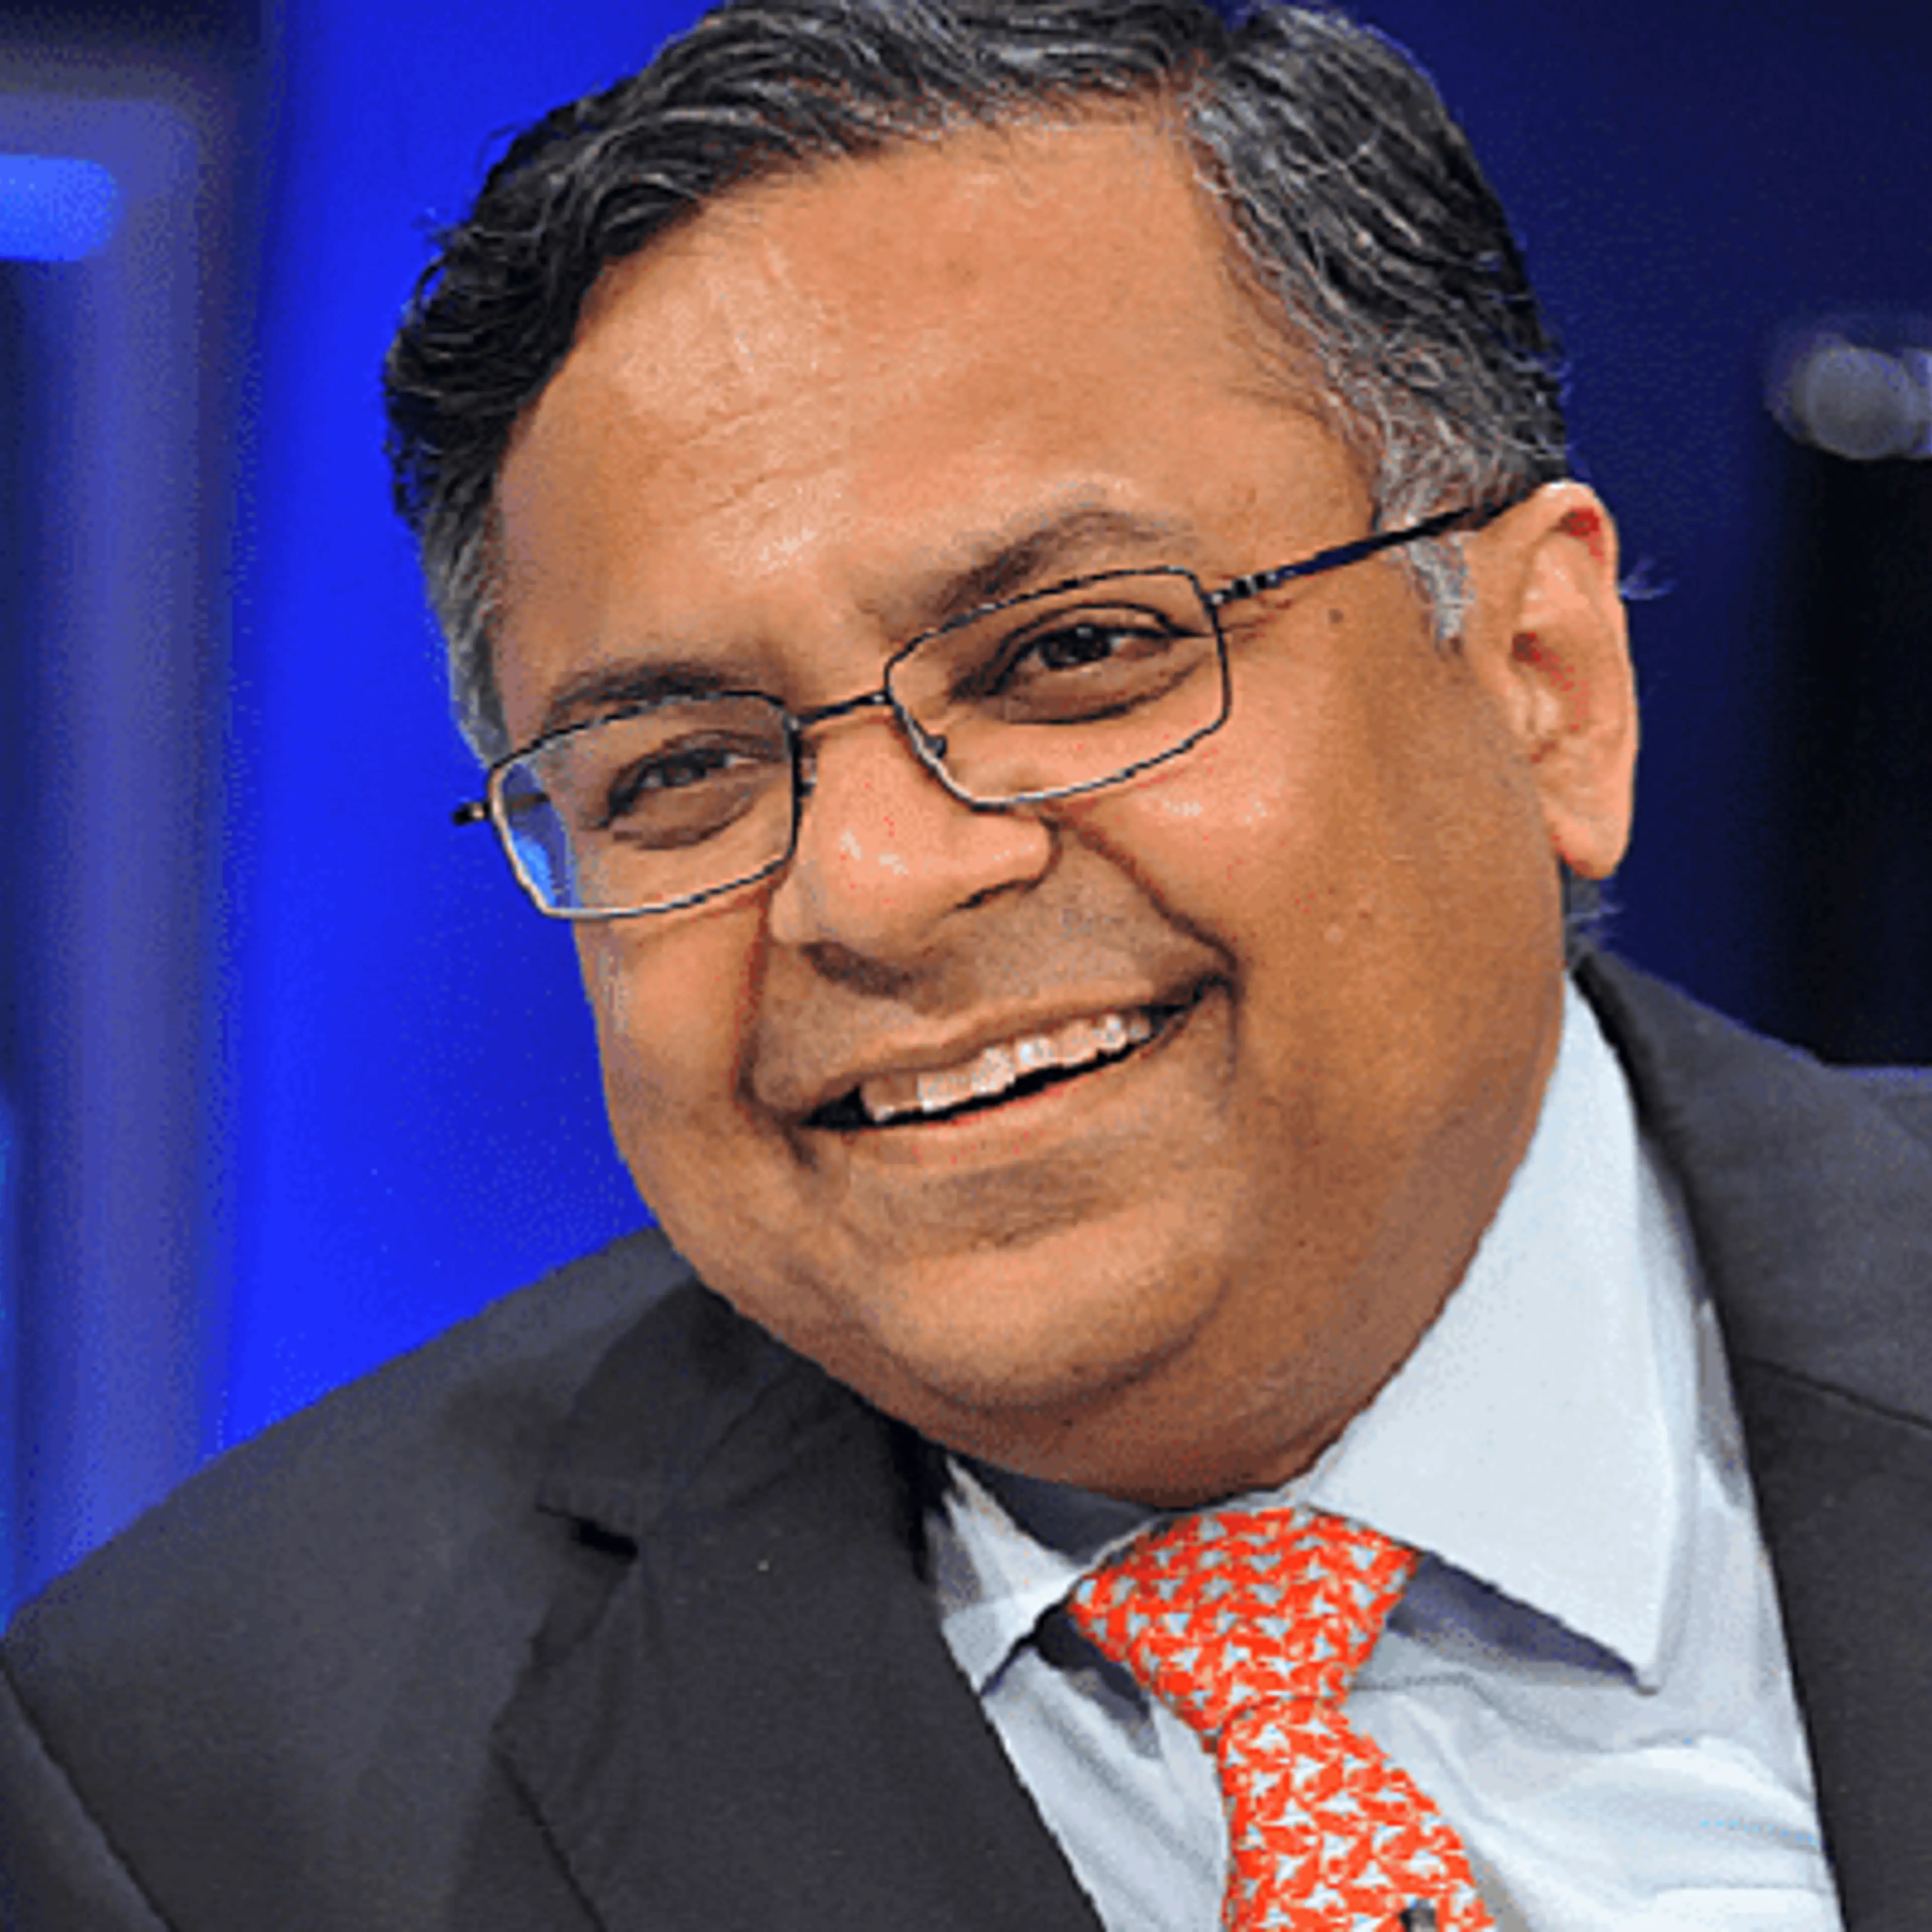 India emerging as a bright spot, poised to lead next decade: N Chandrasekaran